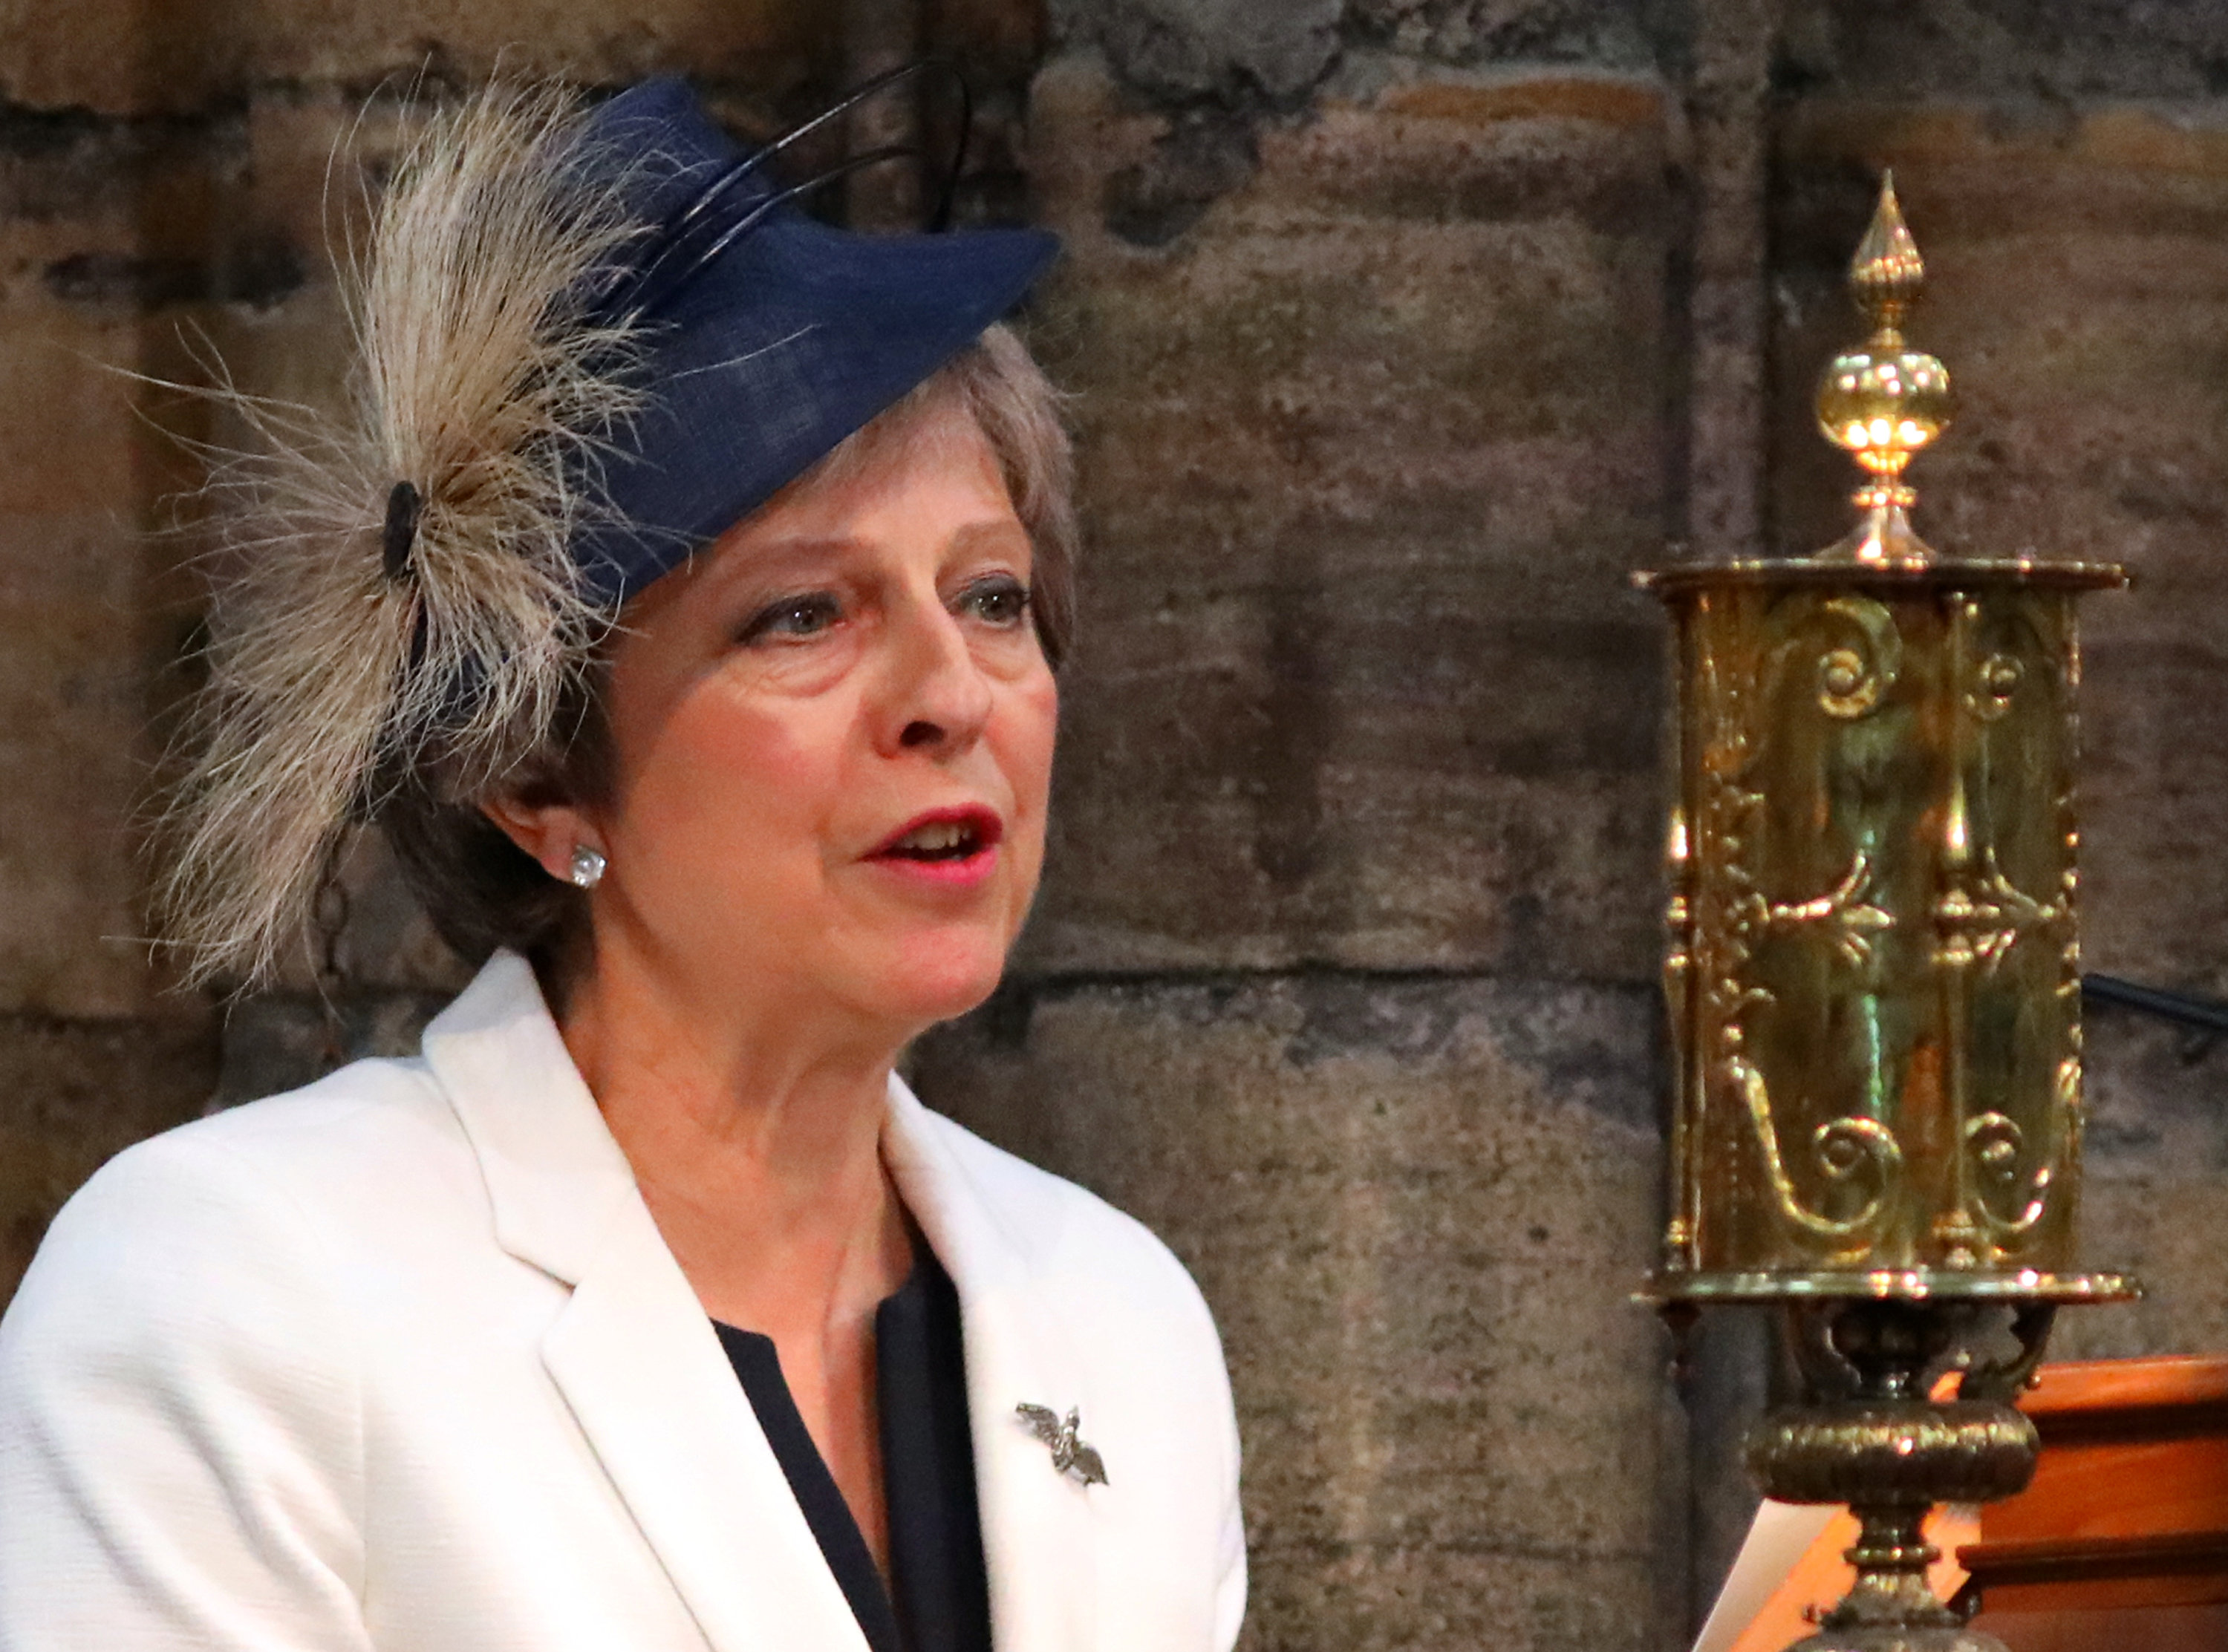 Britain's Prime Minister, Theresa May, speaks at Westminster Abbey for a service to mark the centenary of the Royal Air Force, in central London